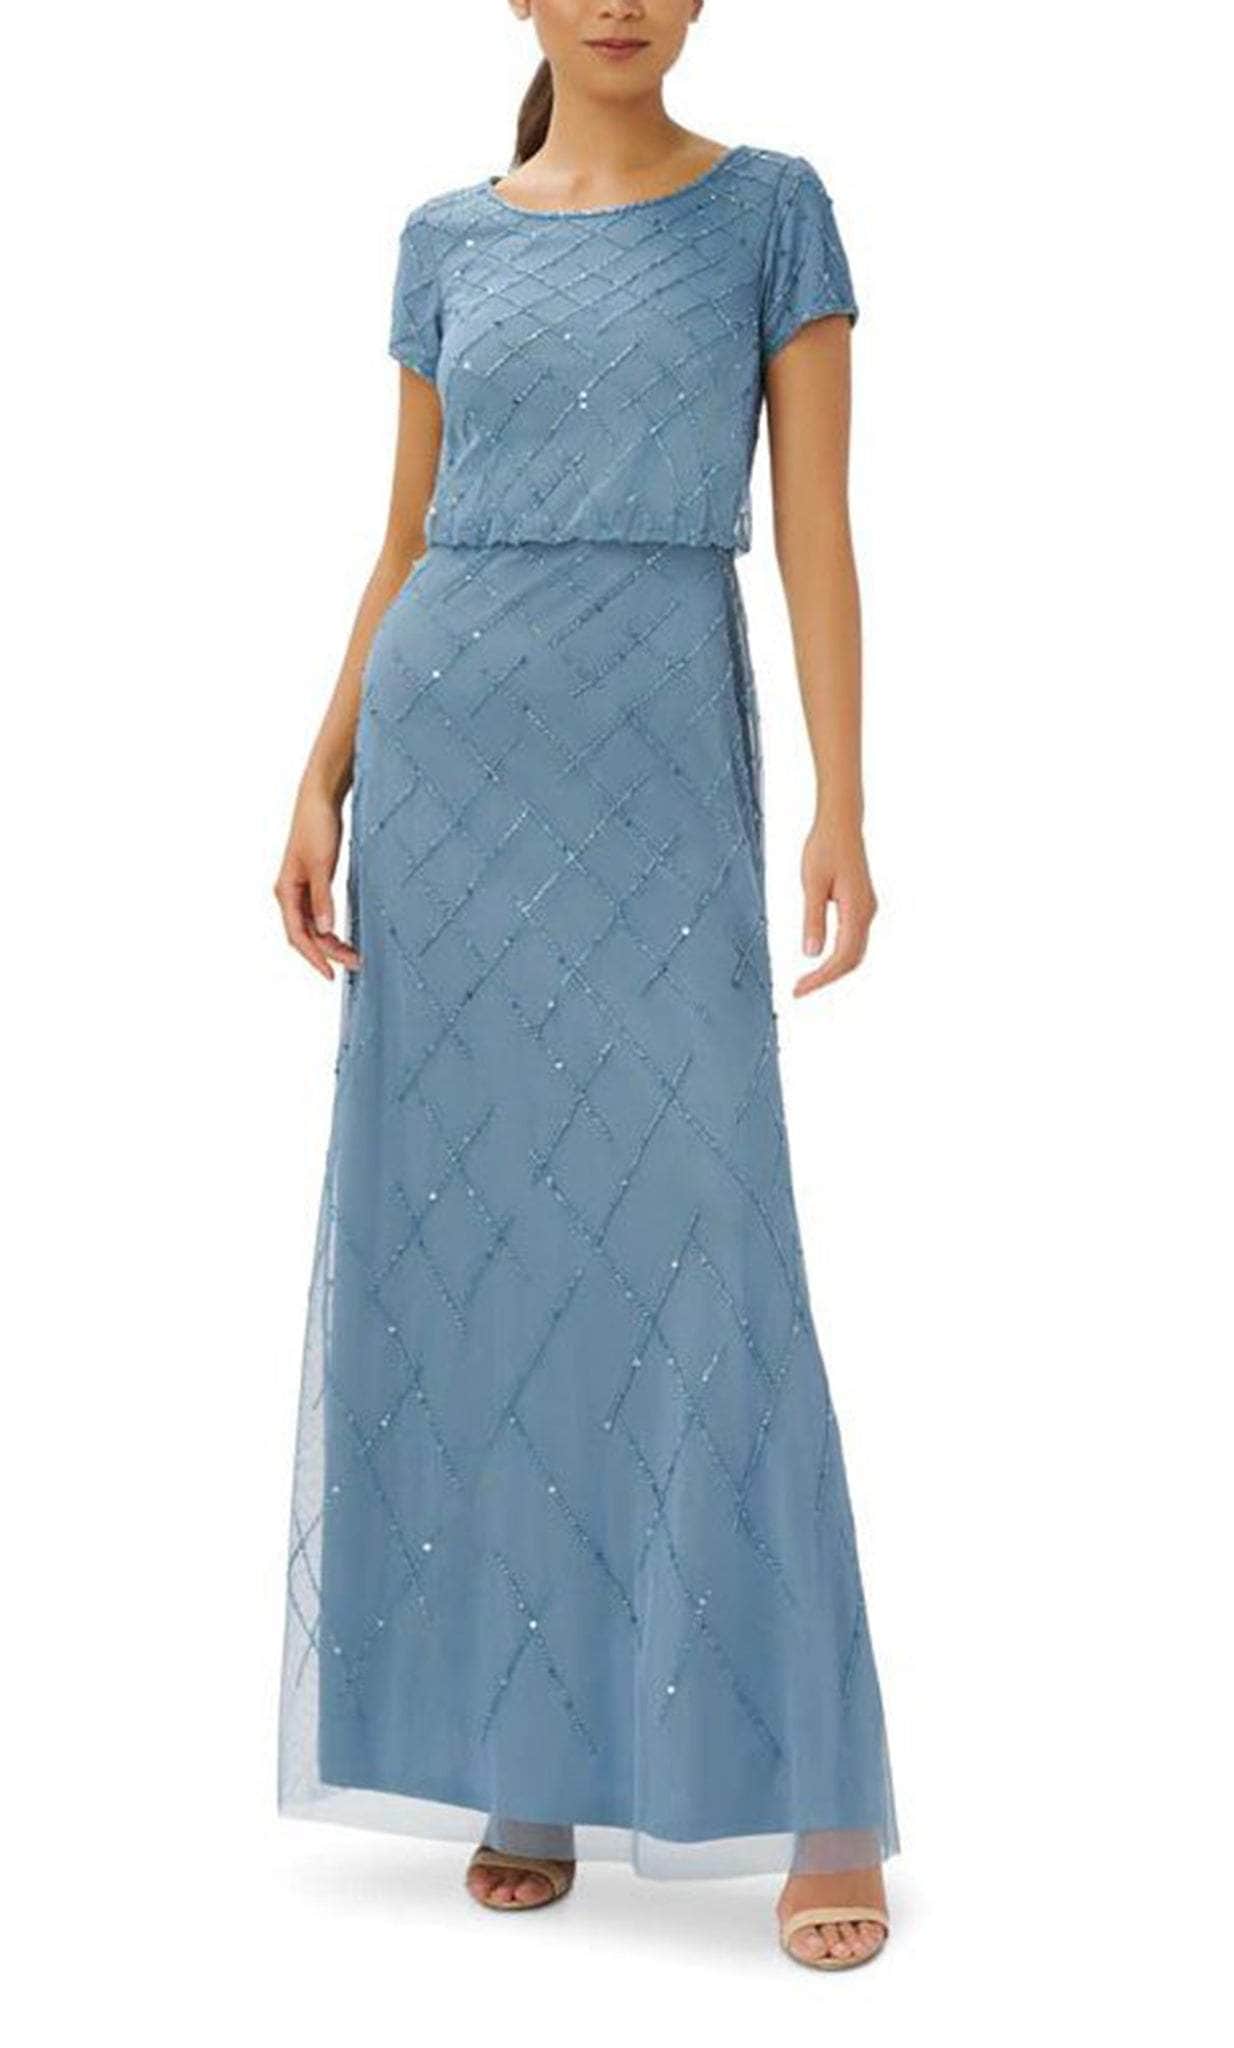 Adrianna Papell AP1E208942 - Short Sleeve Beaded Long Gown Special Occasion Dress 10 / Vintage Blue